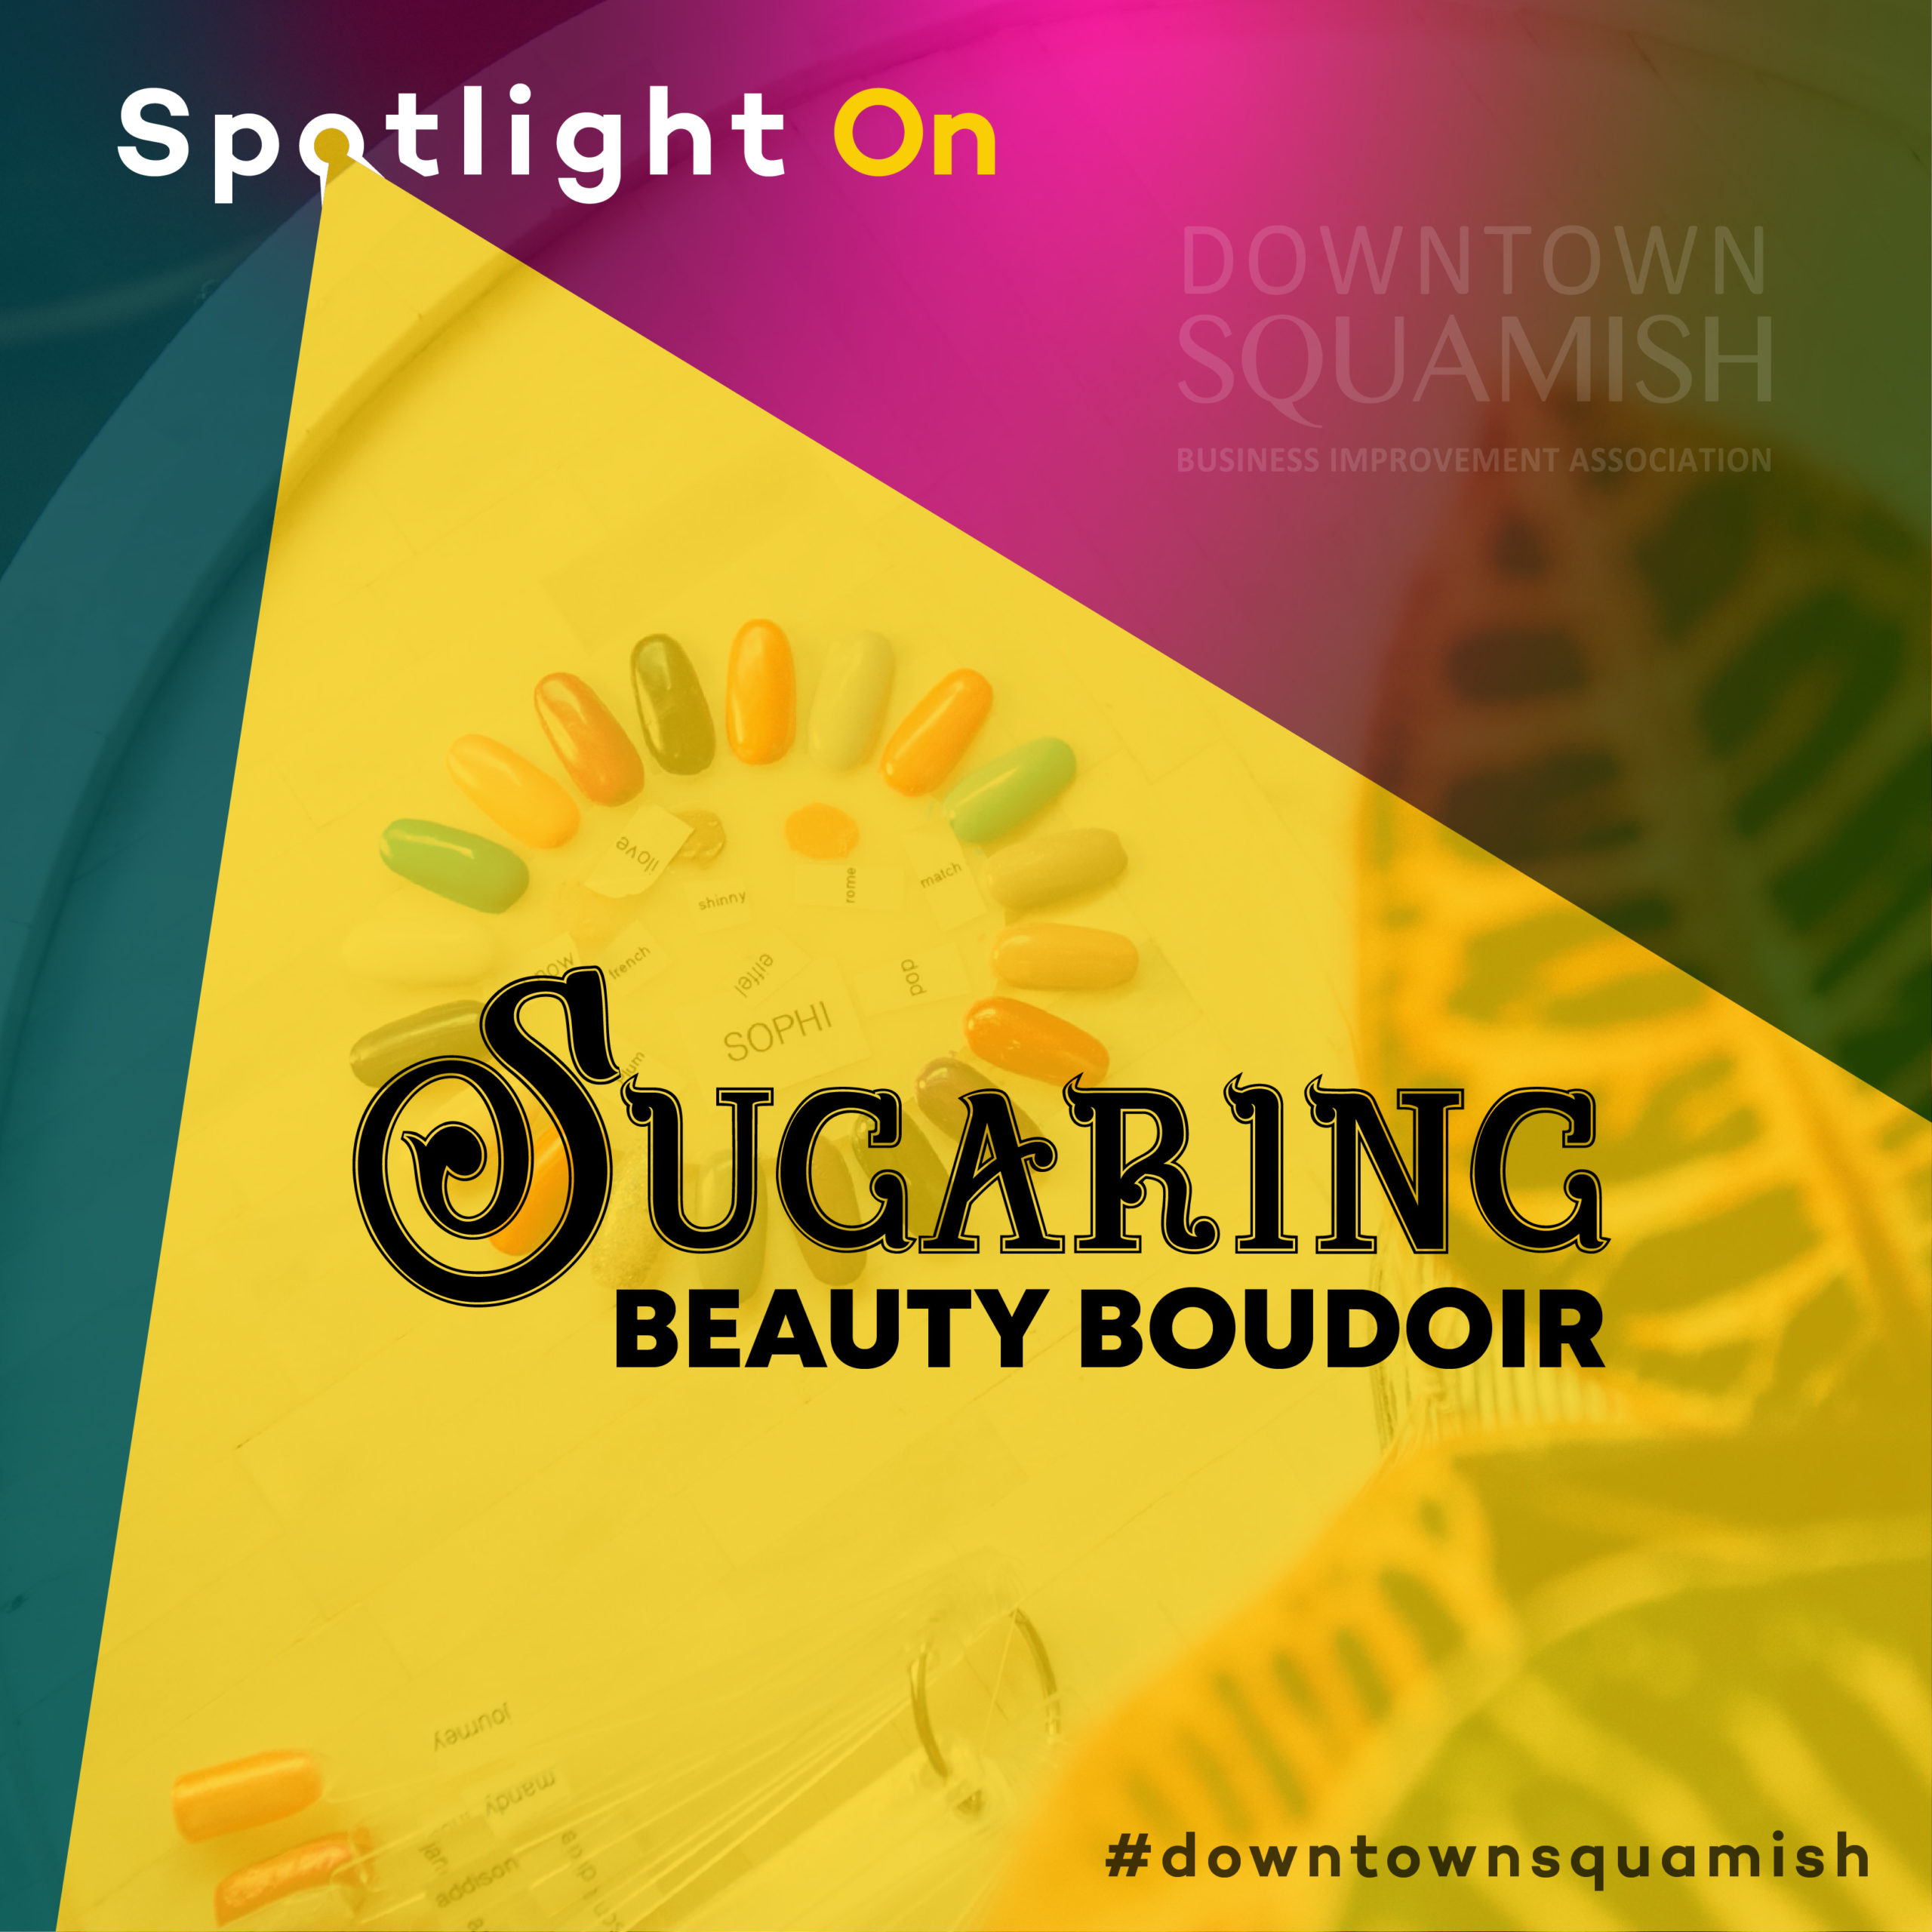 https://www.downtownsquamish.com/wp-content/uploads/2020/08/Spotlight_On_SUGARING-scaled.jpg